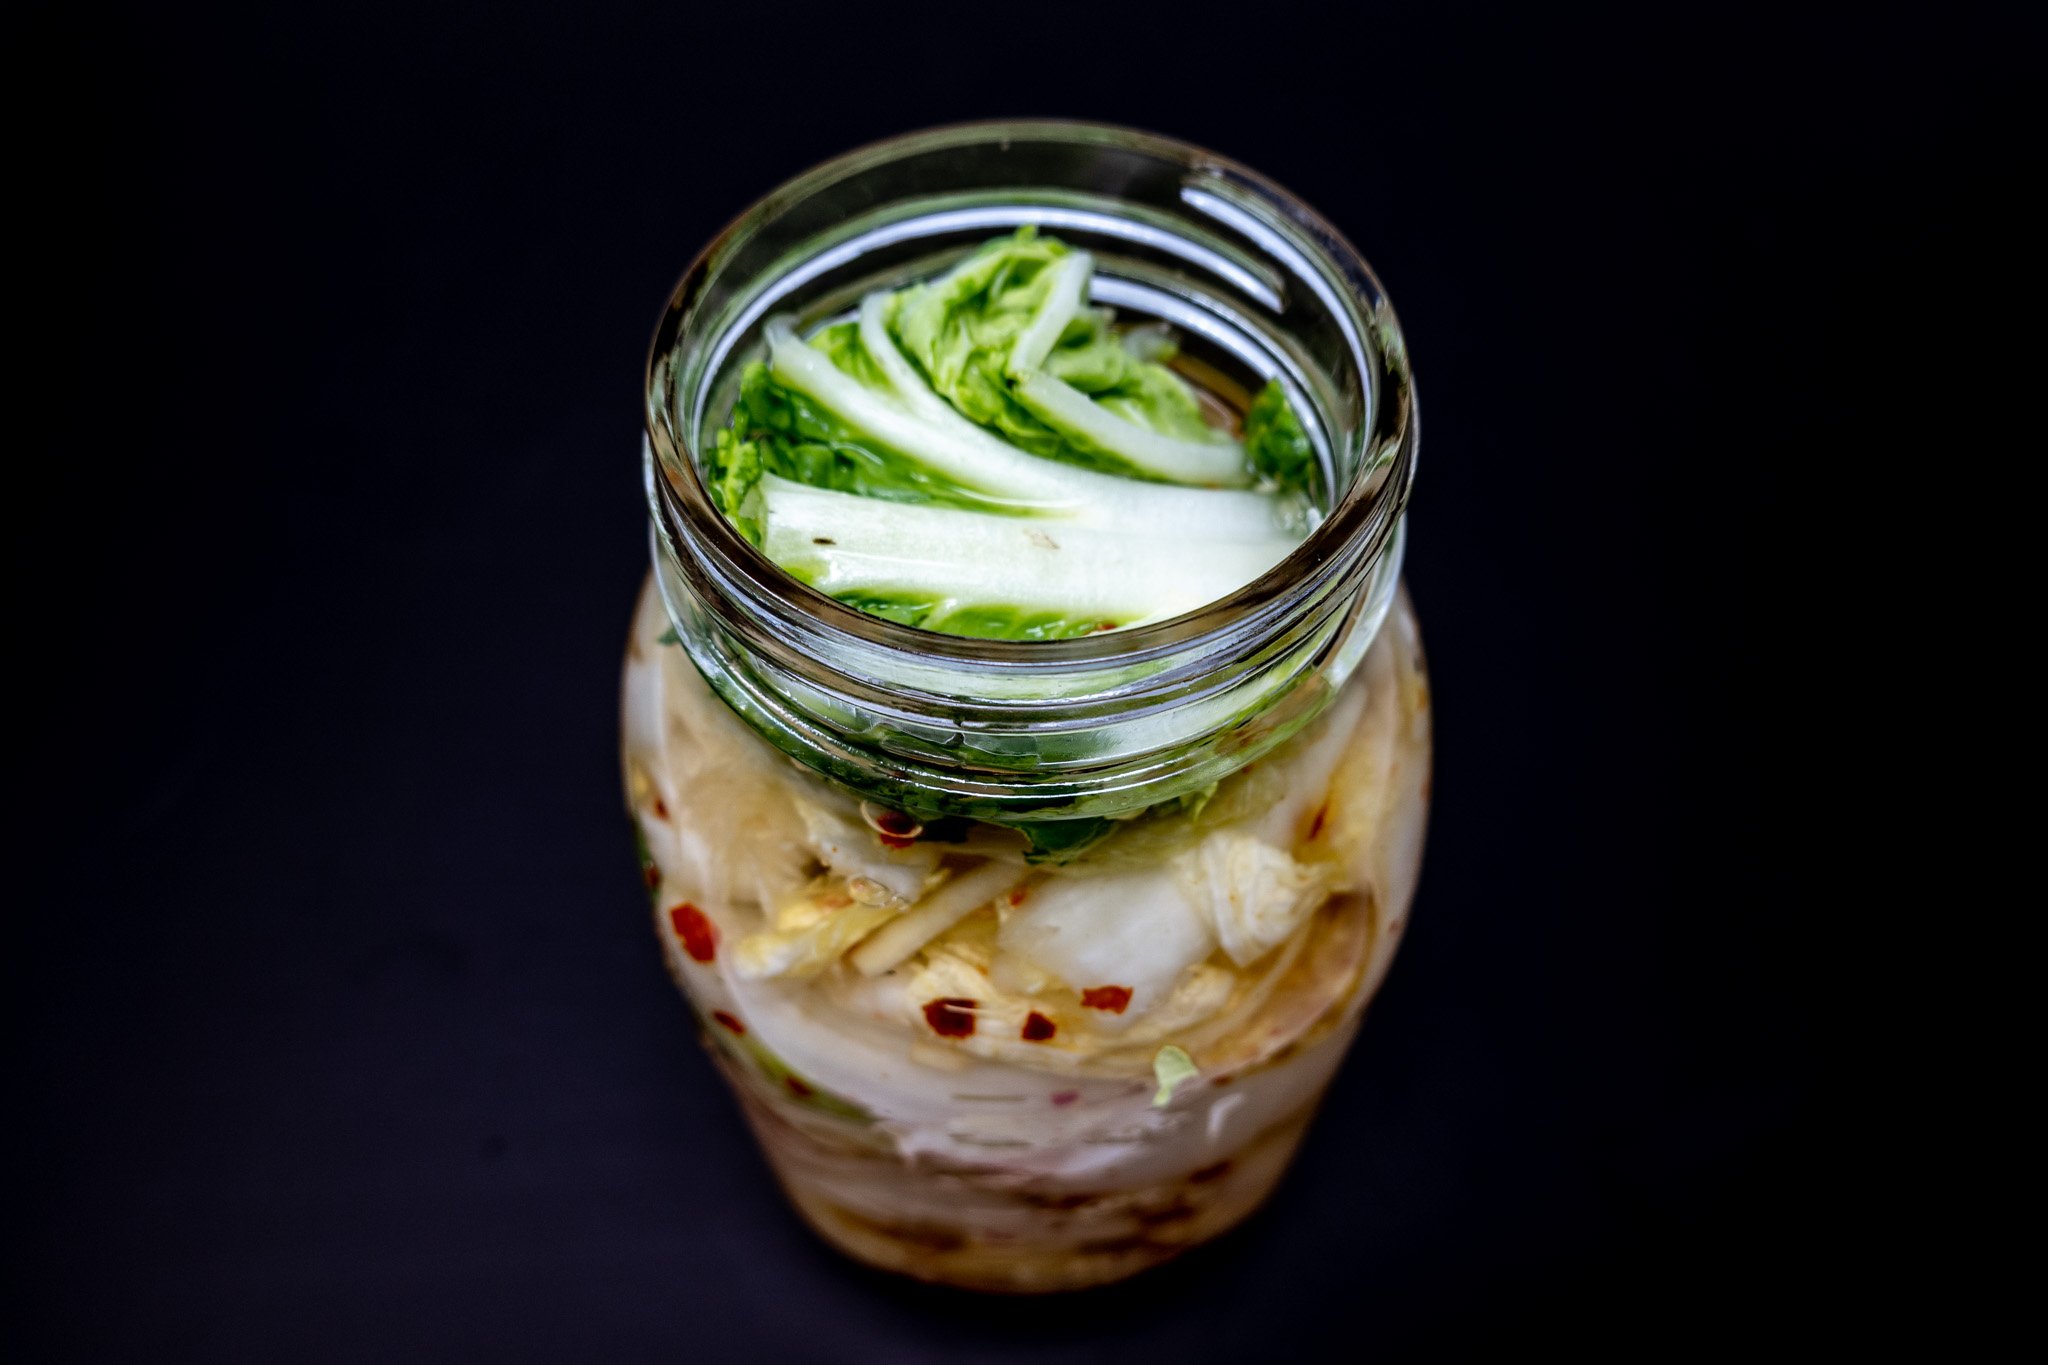 Baechu-kimchi fermenting in a jar with a cabbage leaf on top